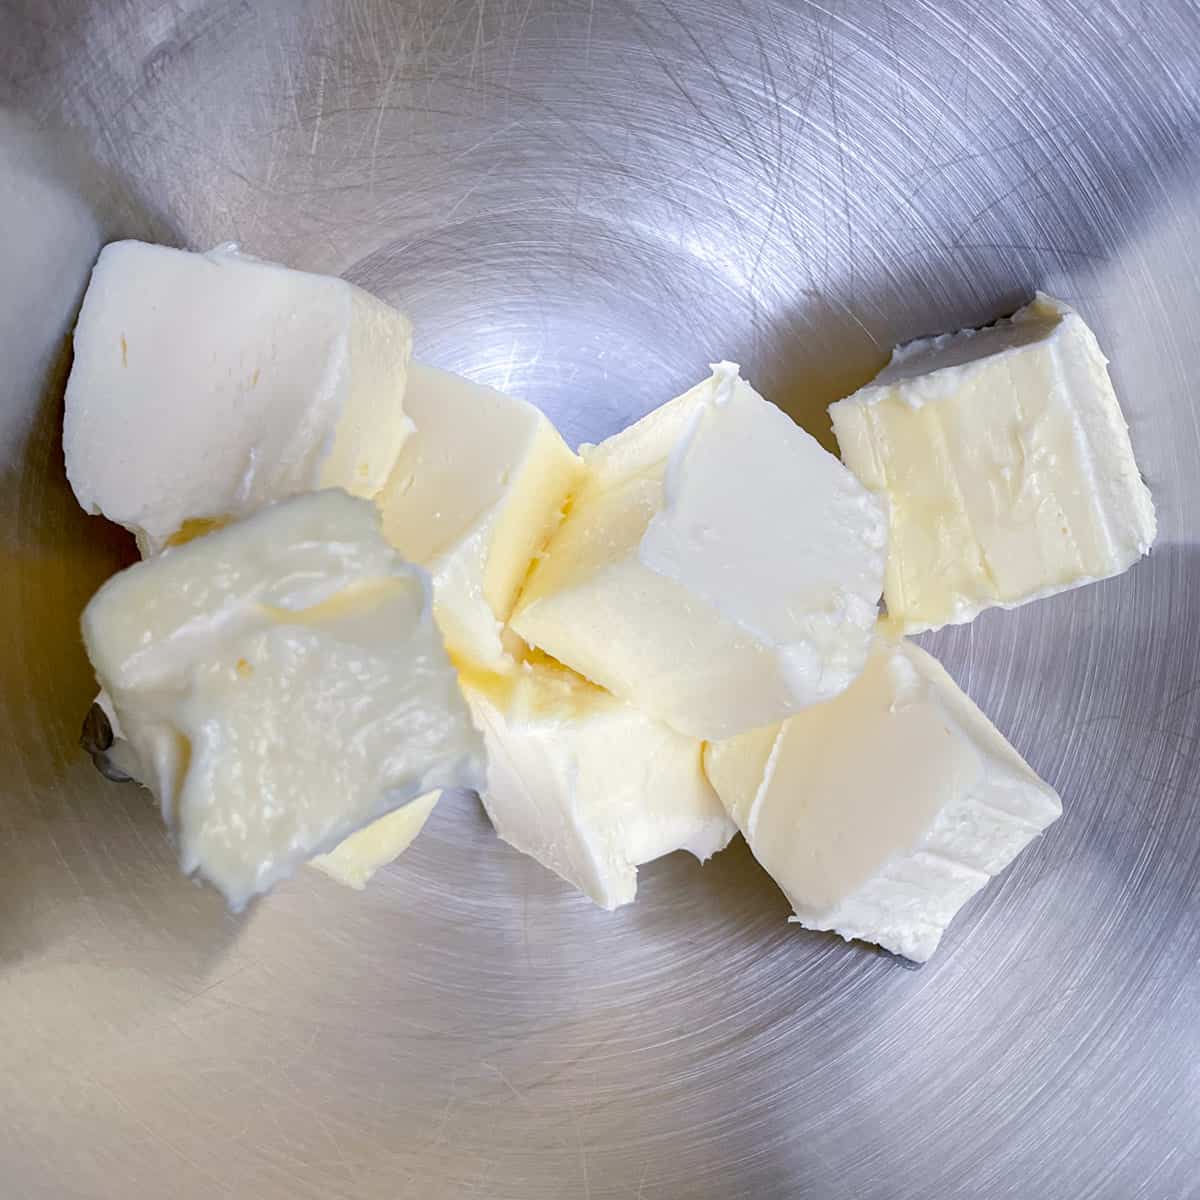 Soft butter cut into cubes sitting in a mixer bowl.